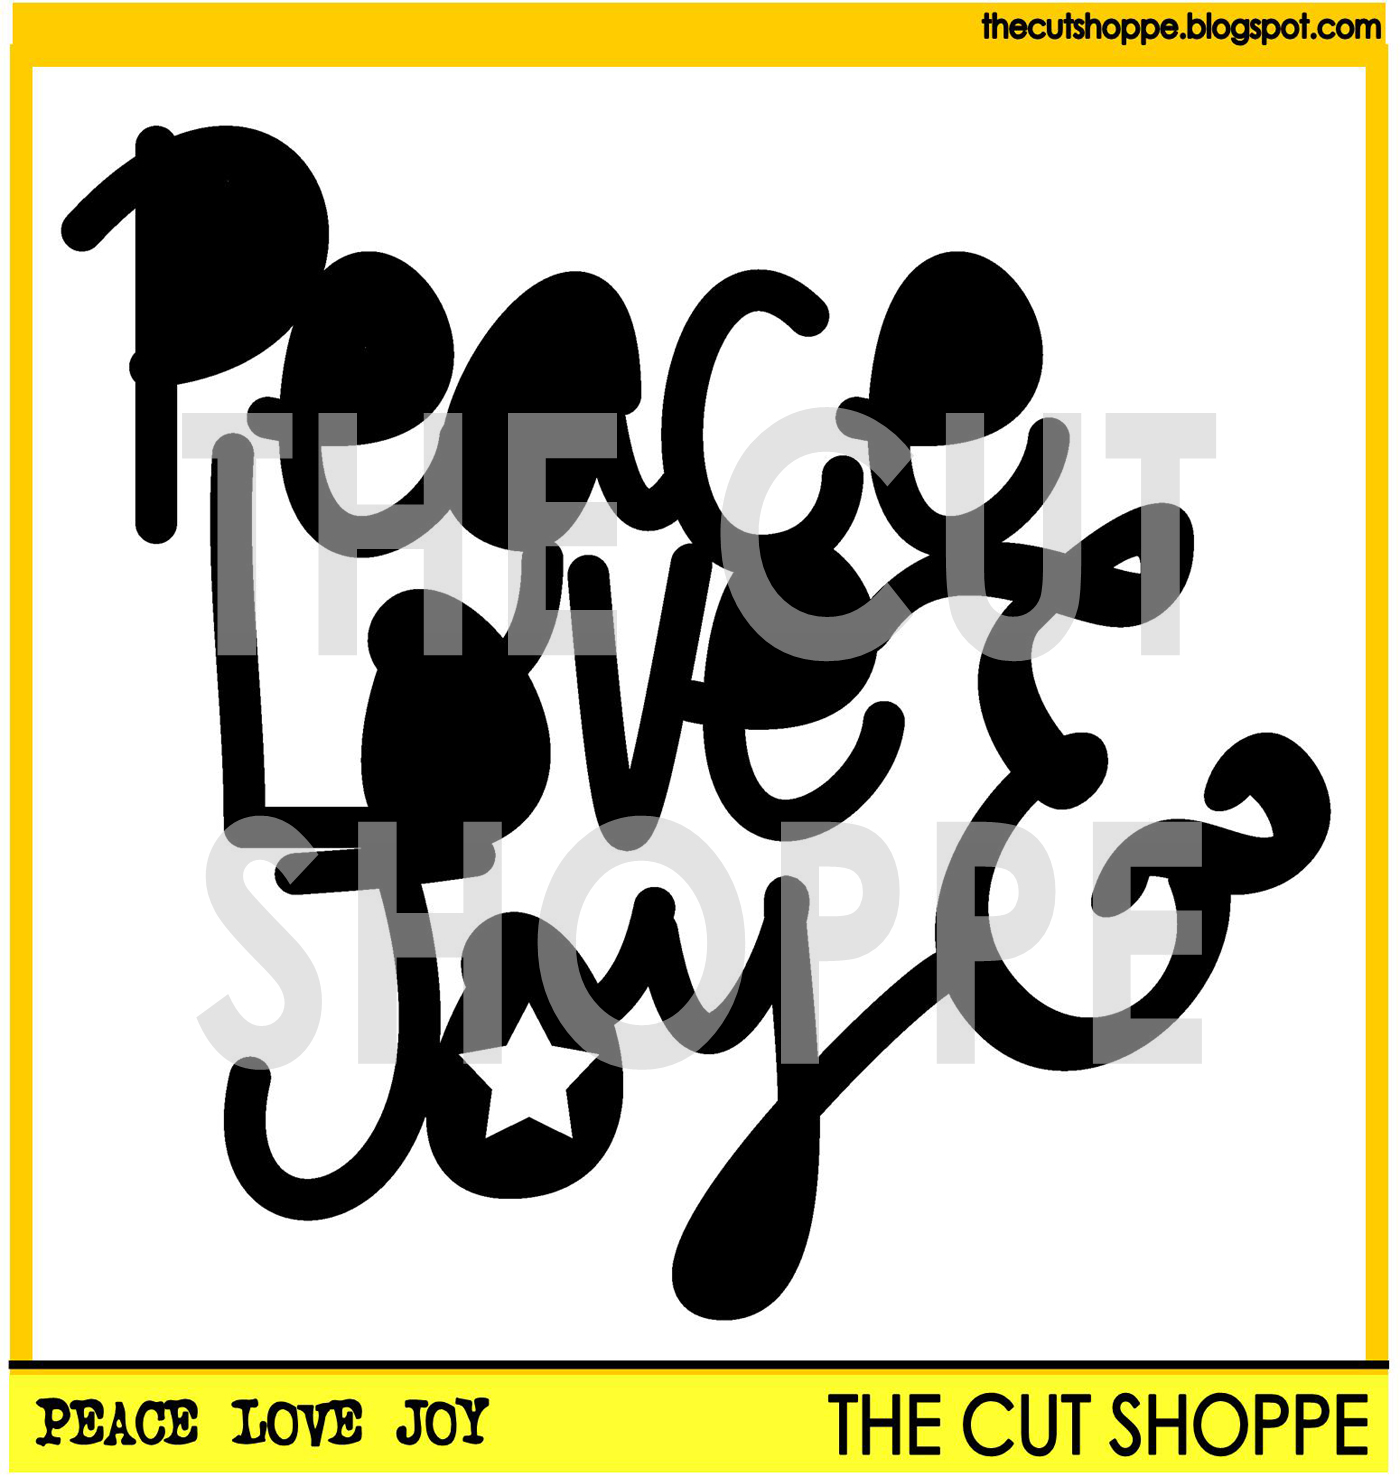 https://www.etsy.com/listing/212852145/the-peace-love-joy-cut-file-is-a?ref=shop_home_active_2